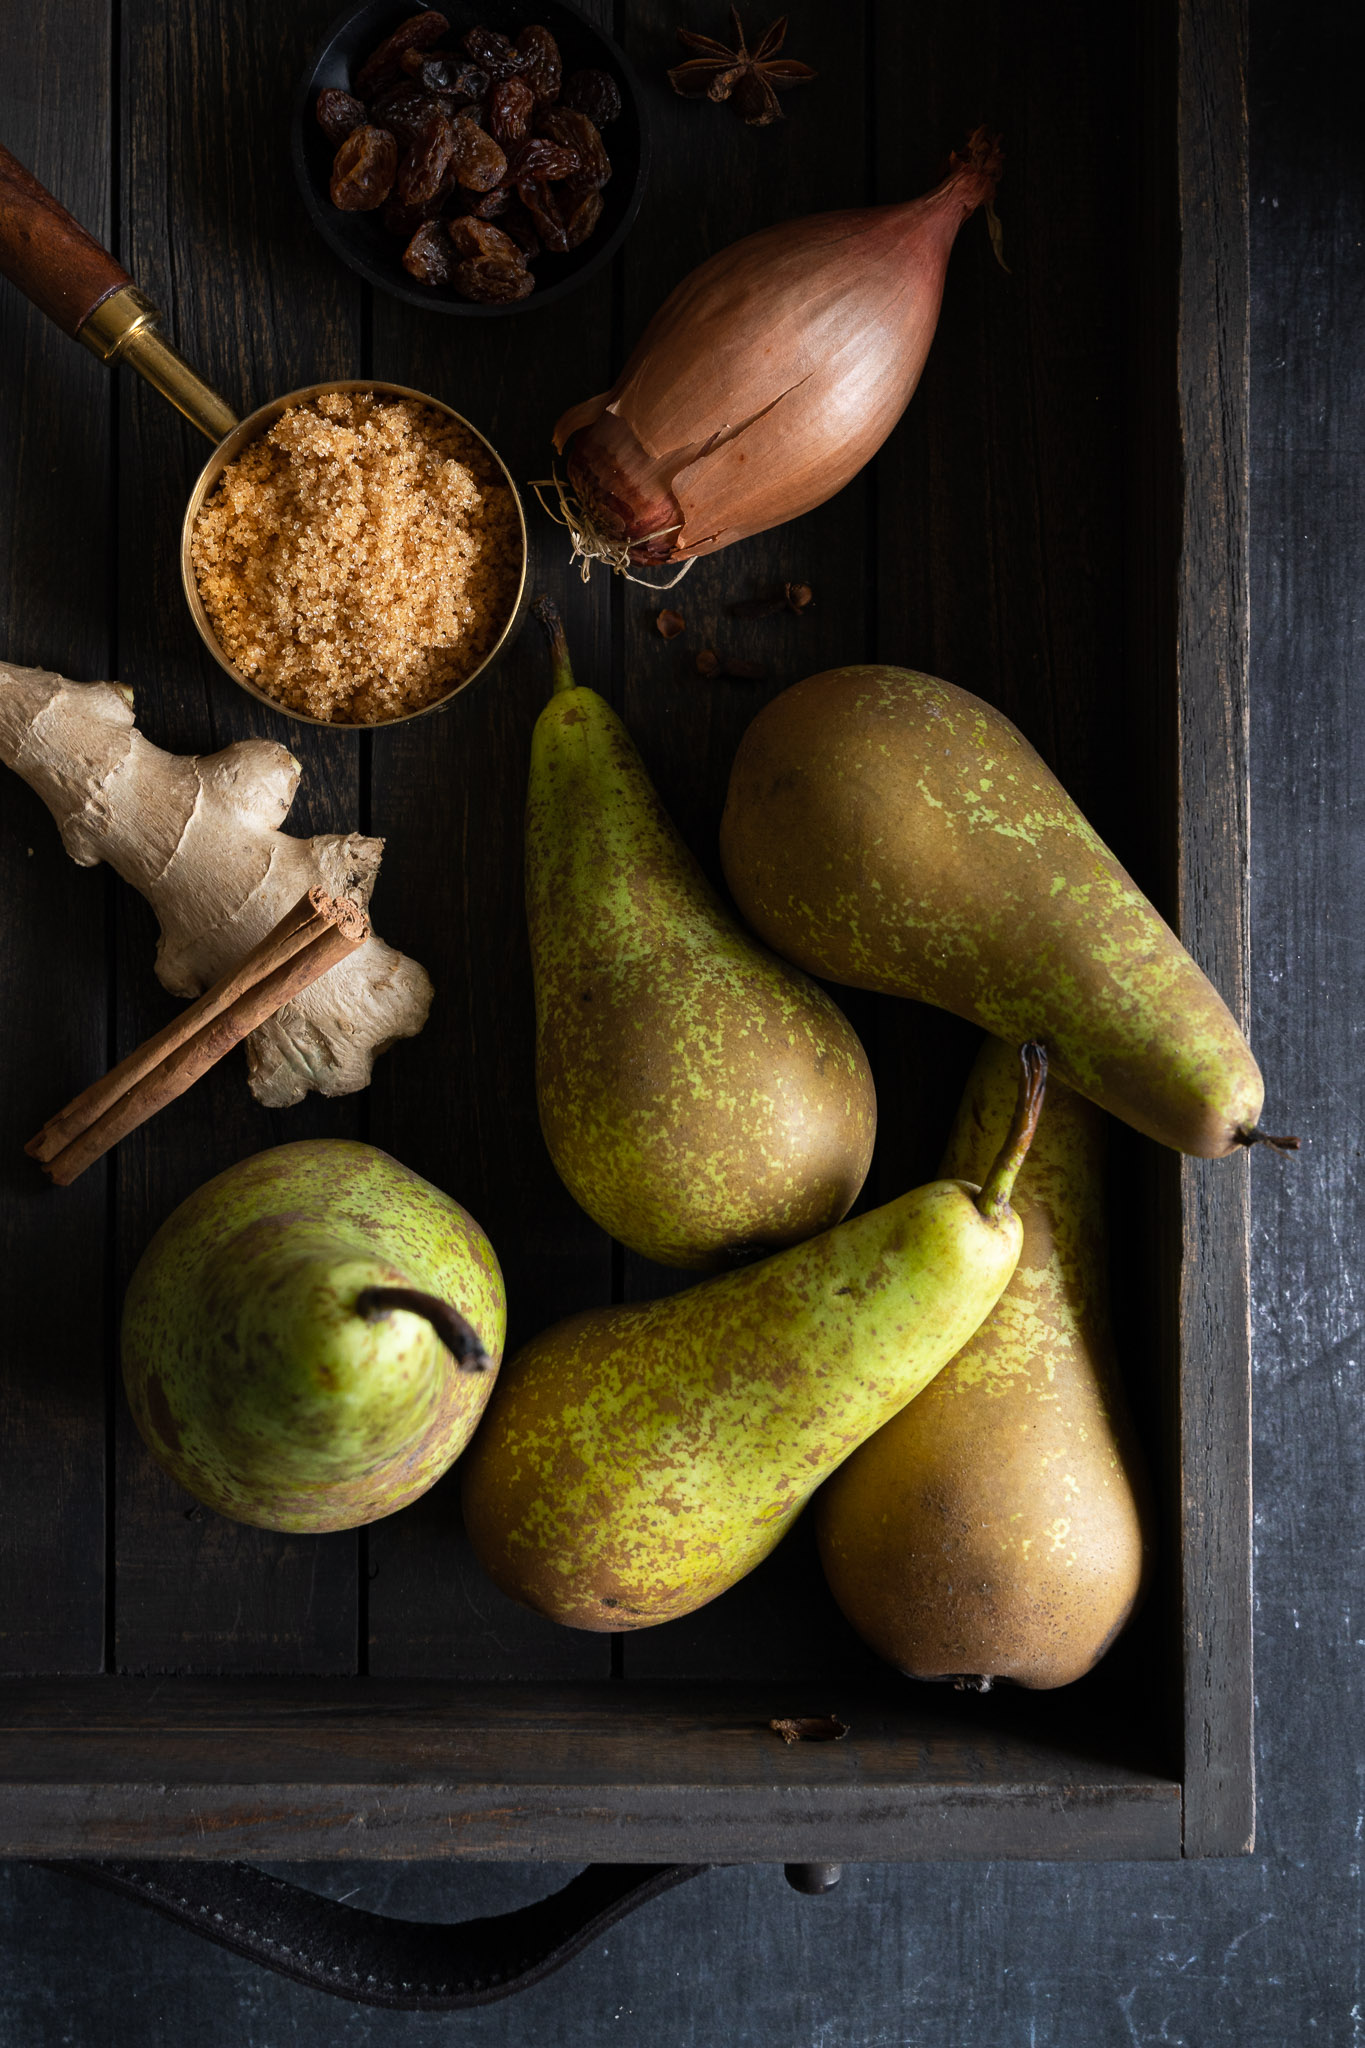 Ingredients for home-made pear chutney recipe